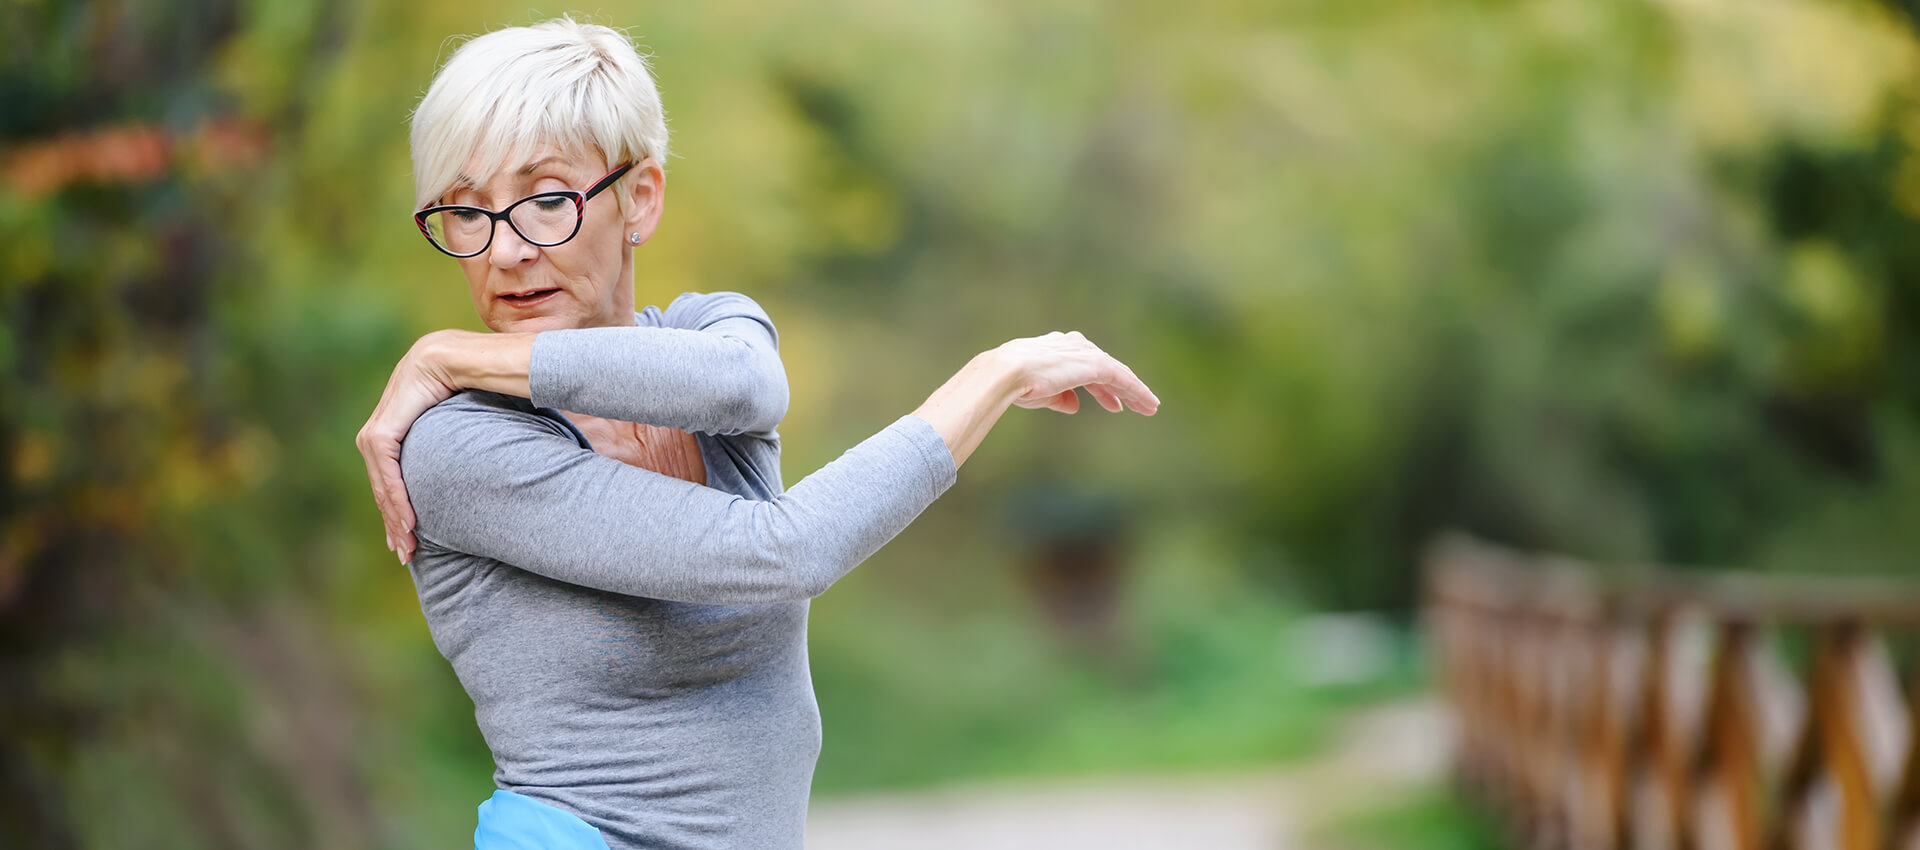 Elderly woman exercising outdoors in nature having shoulder pain